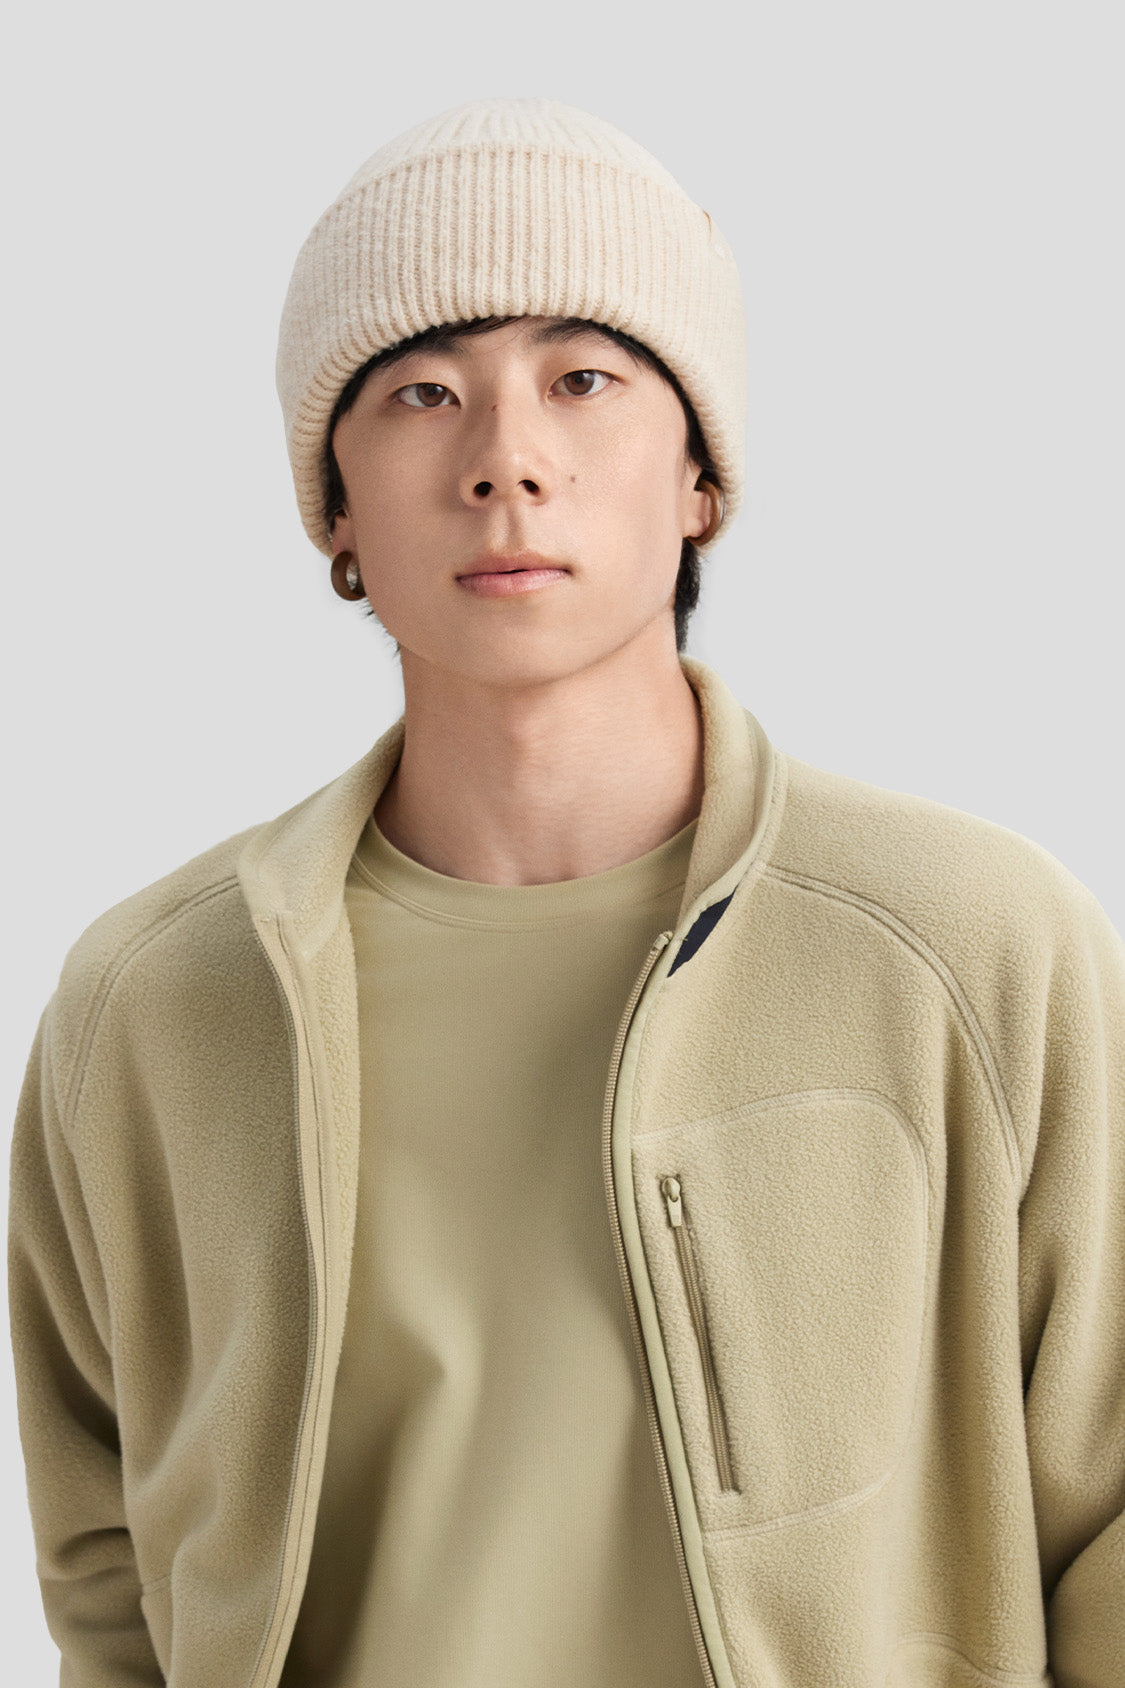 beneunder winter knit beanie for extra warmth #color_autumn wheat